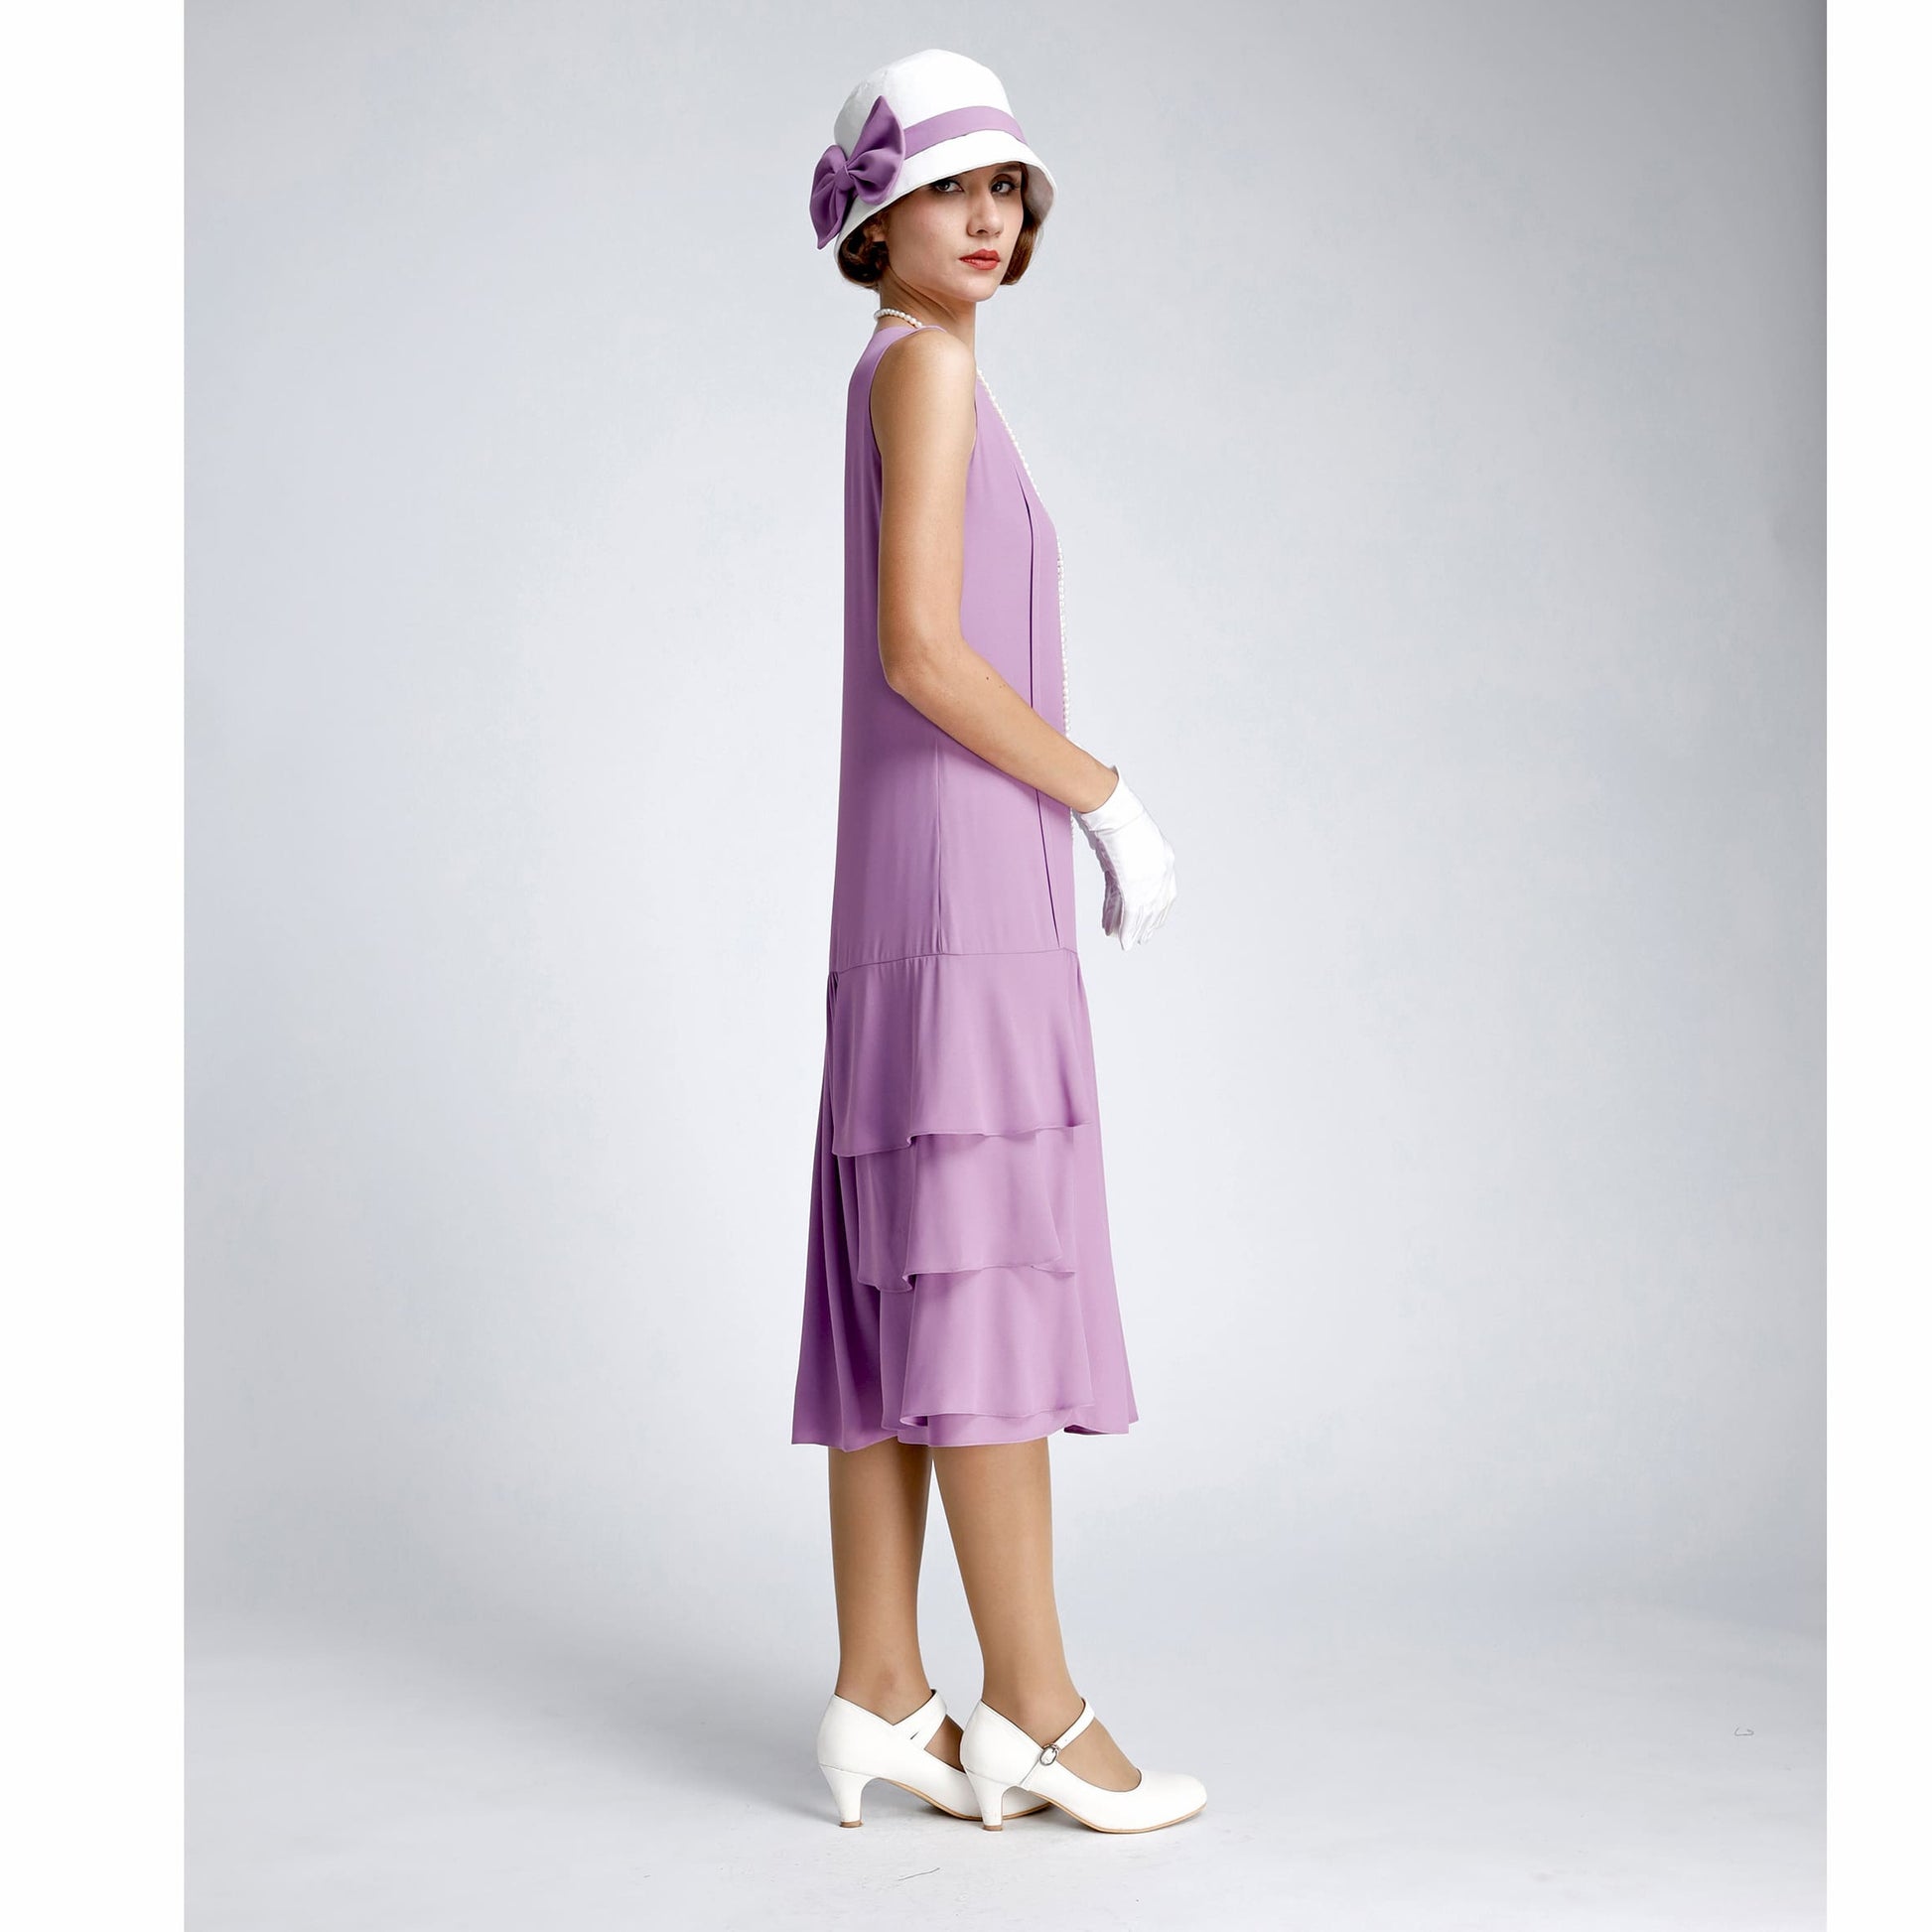 Purple 1920s dress. The lavender Roaring 20s fashion tea dress with tiered skirt can be worn as a Great Gatsby dress or Downton Abbey dress.